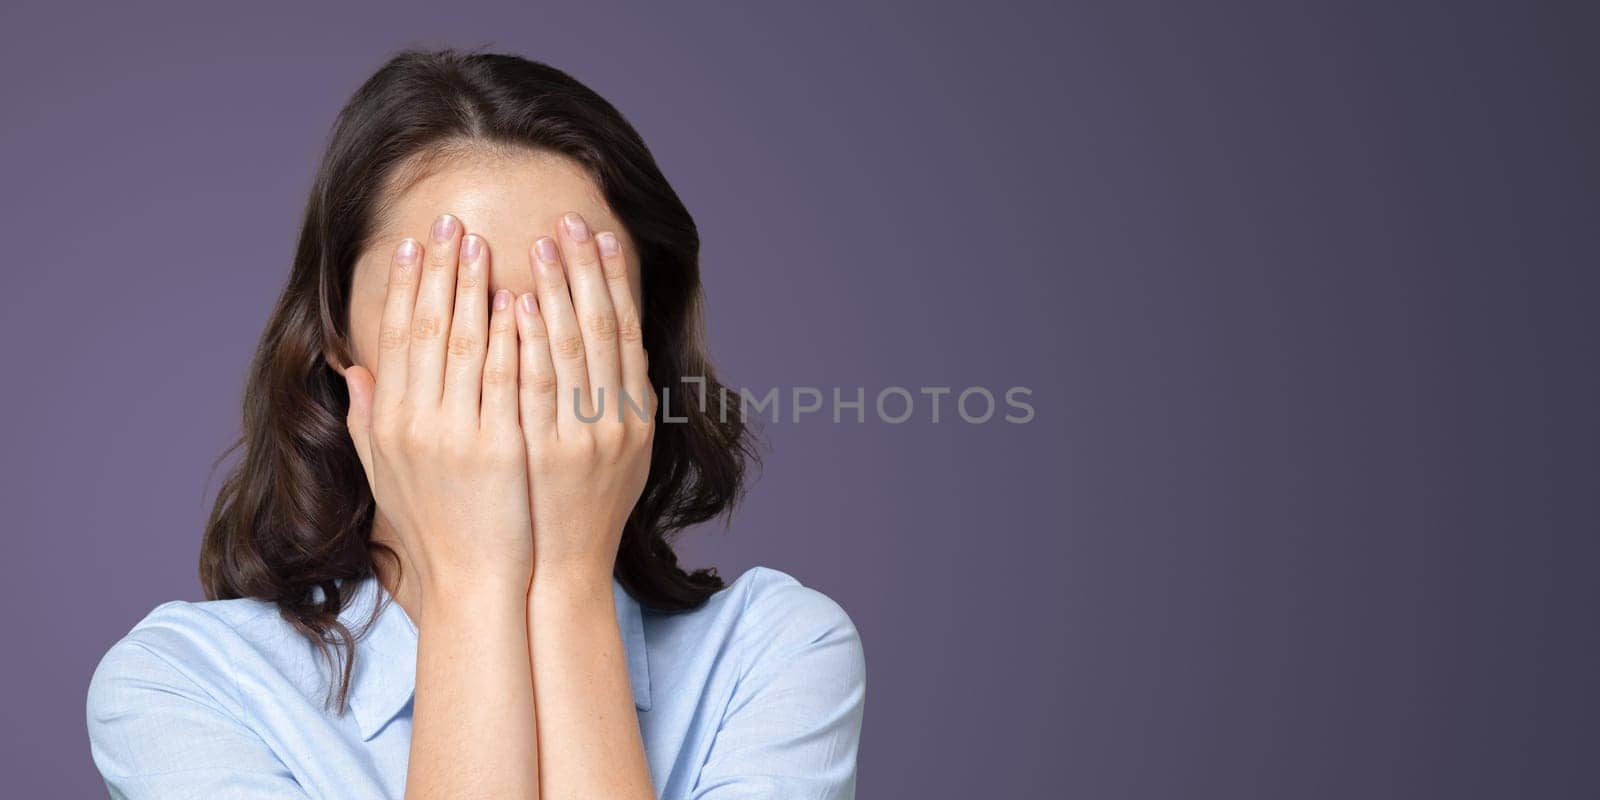 Woman portrait hides her face in her hands